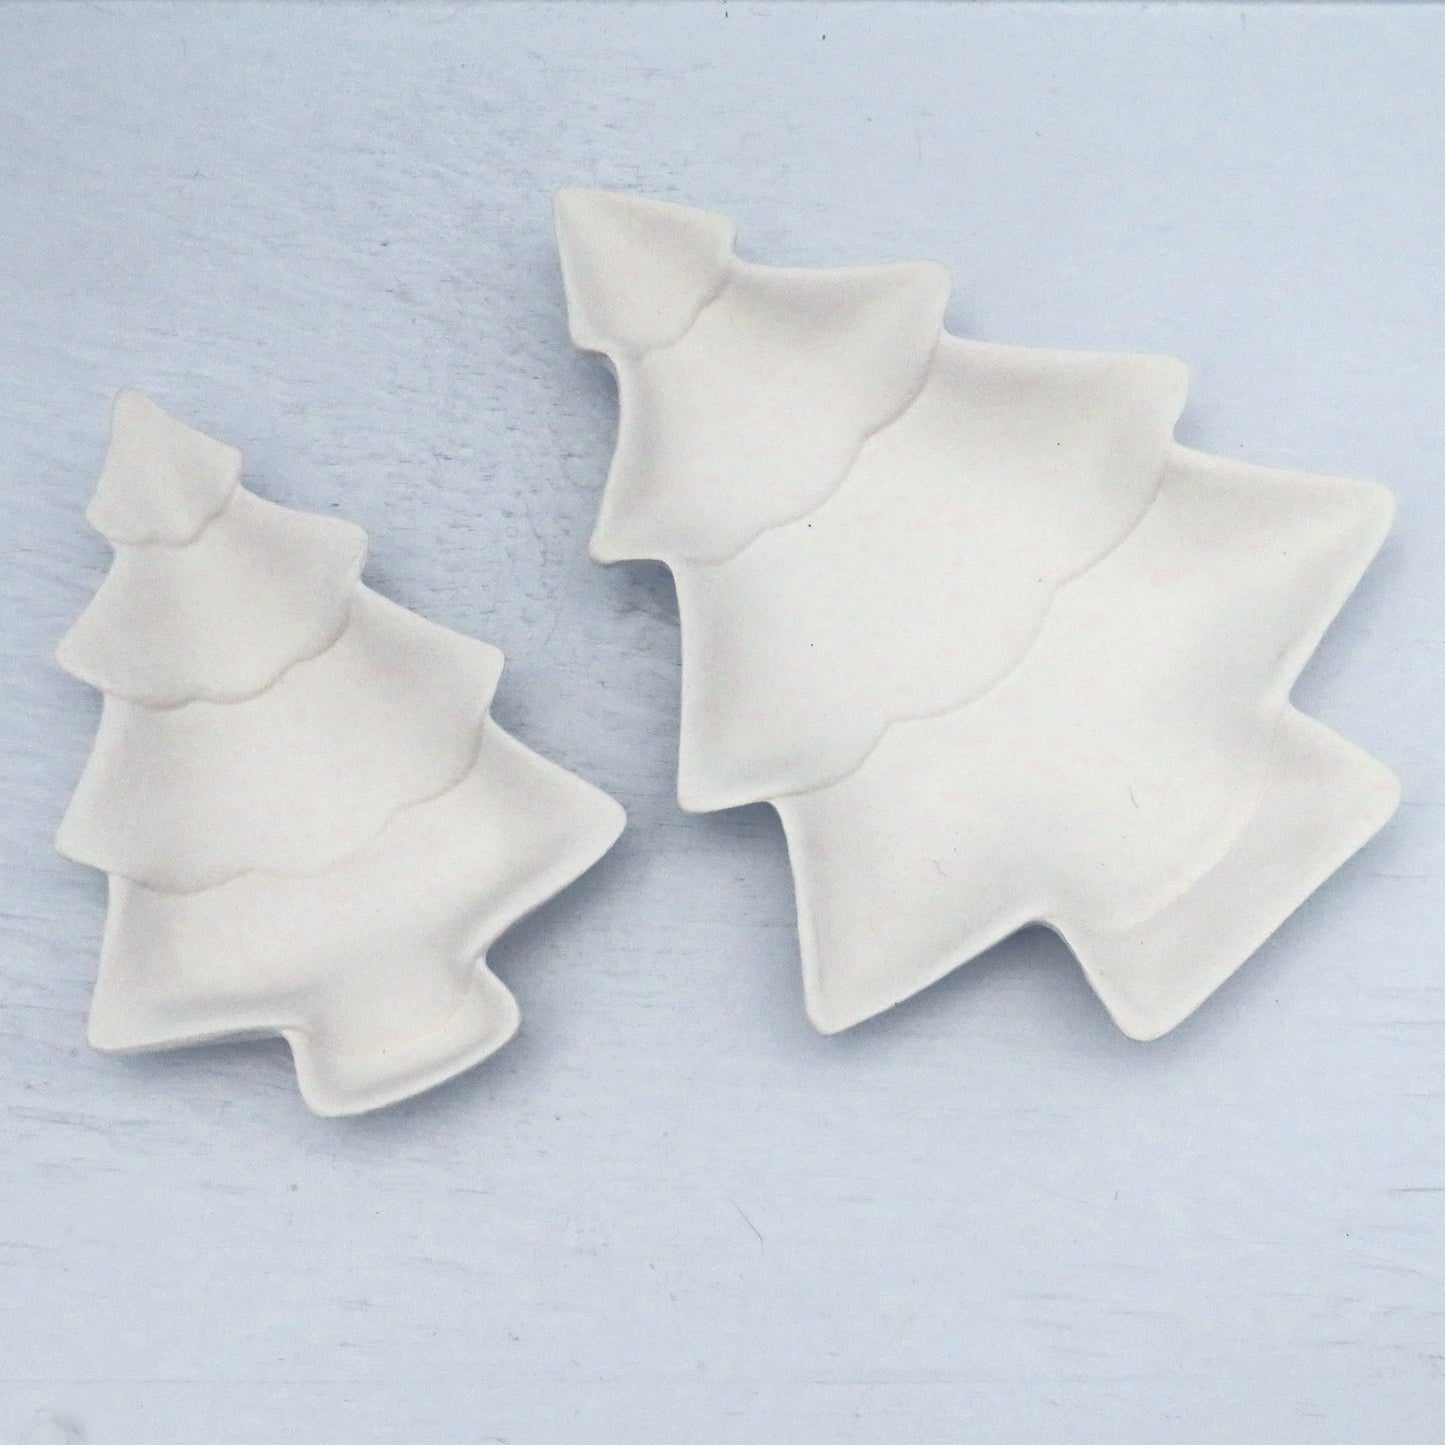 2 ready to paint Christmas tree trinket dishes on a pale blue background